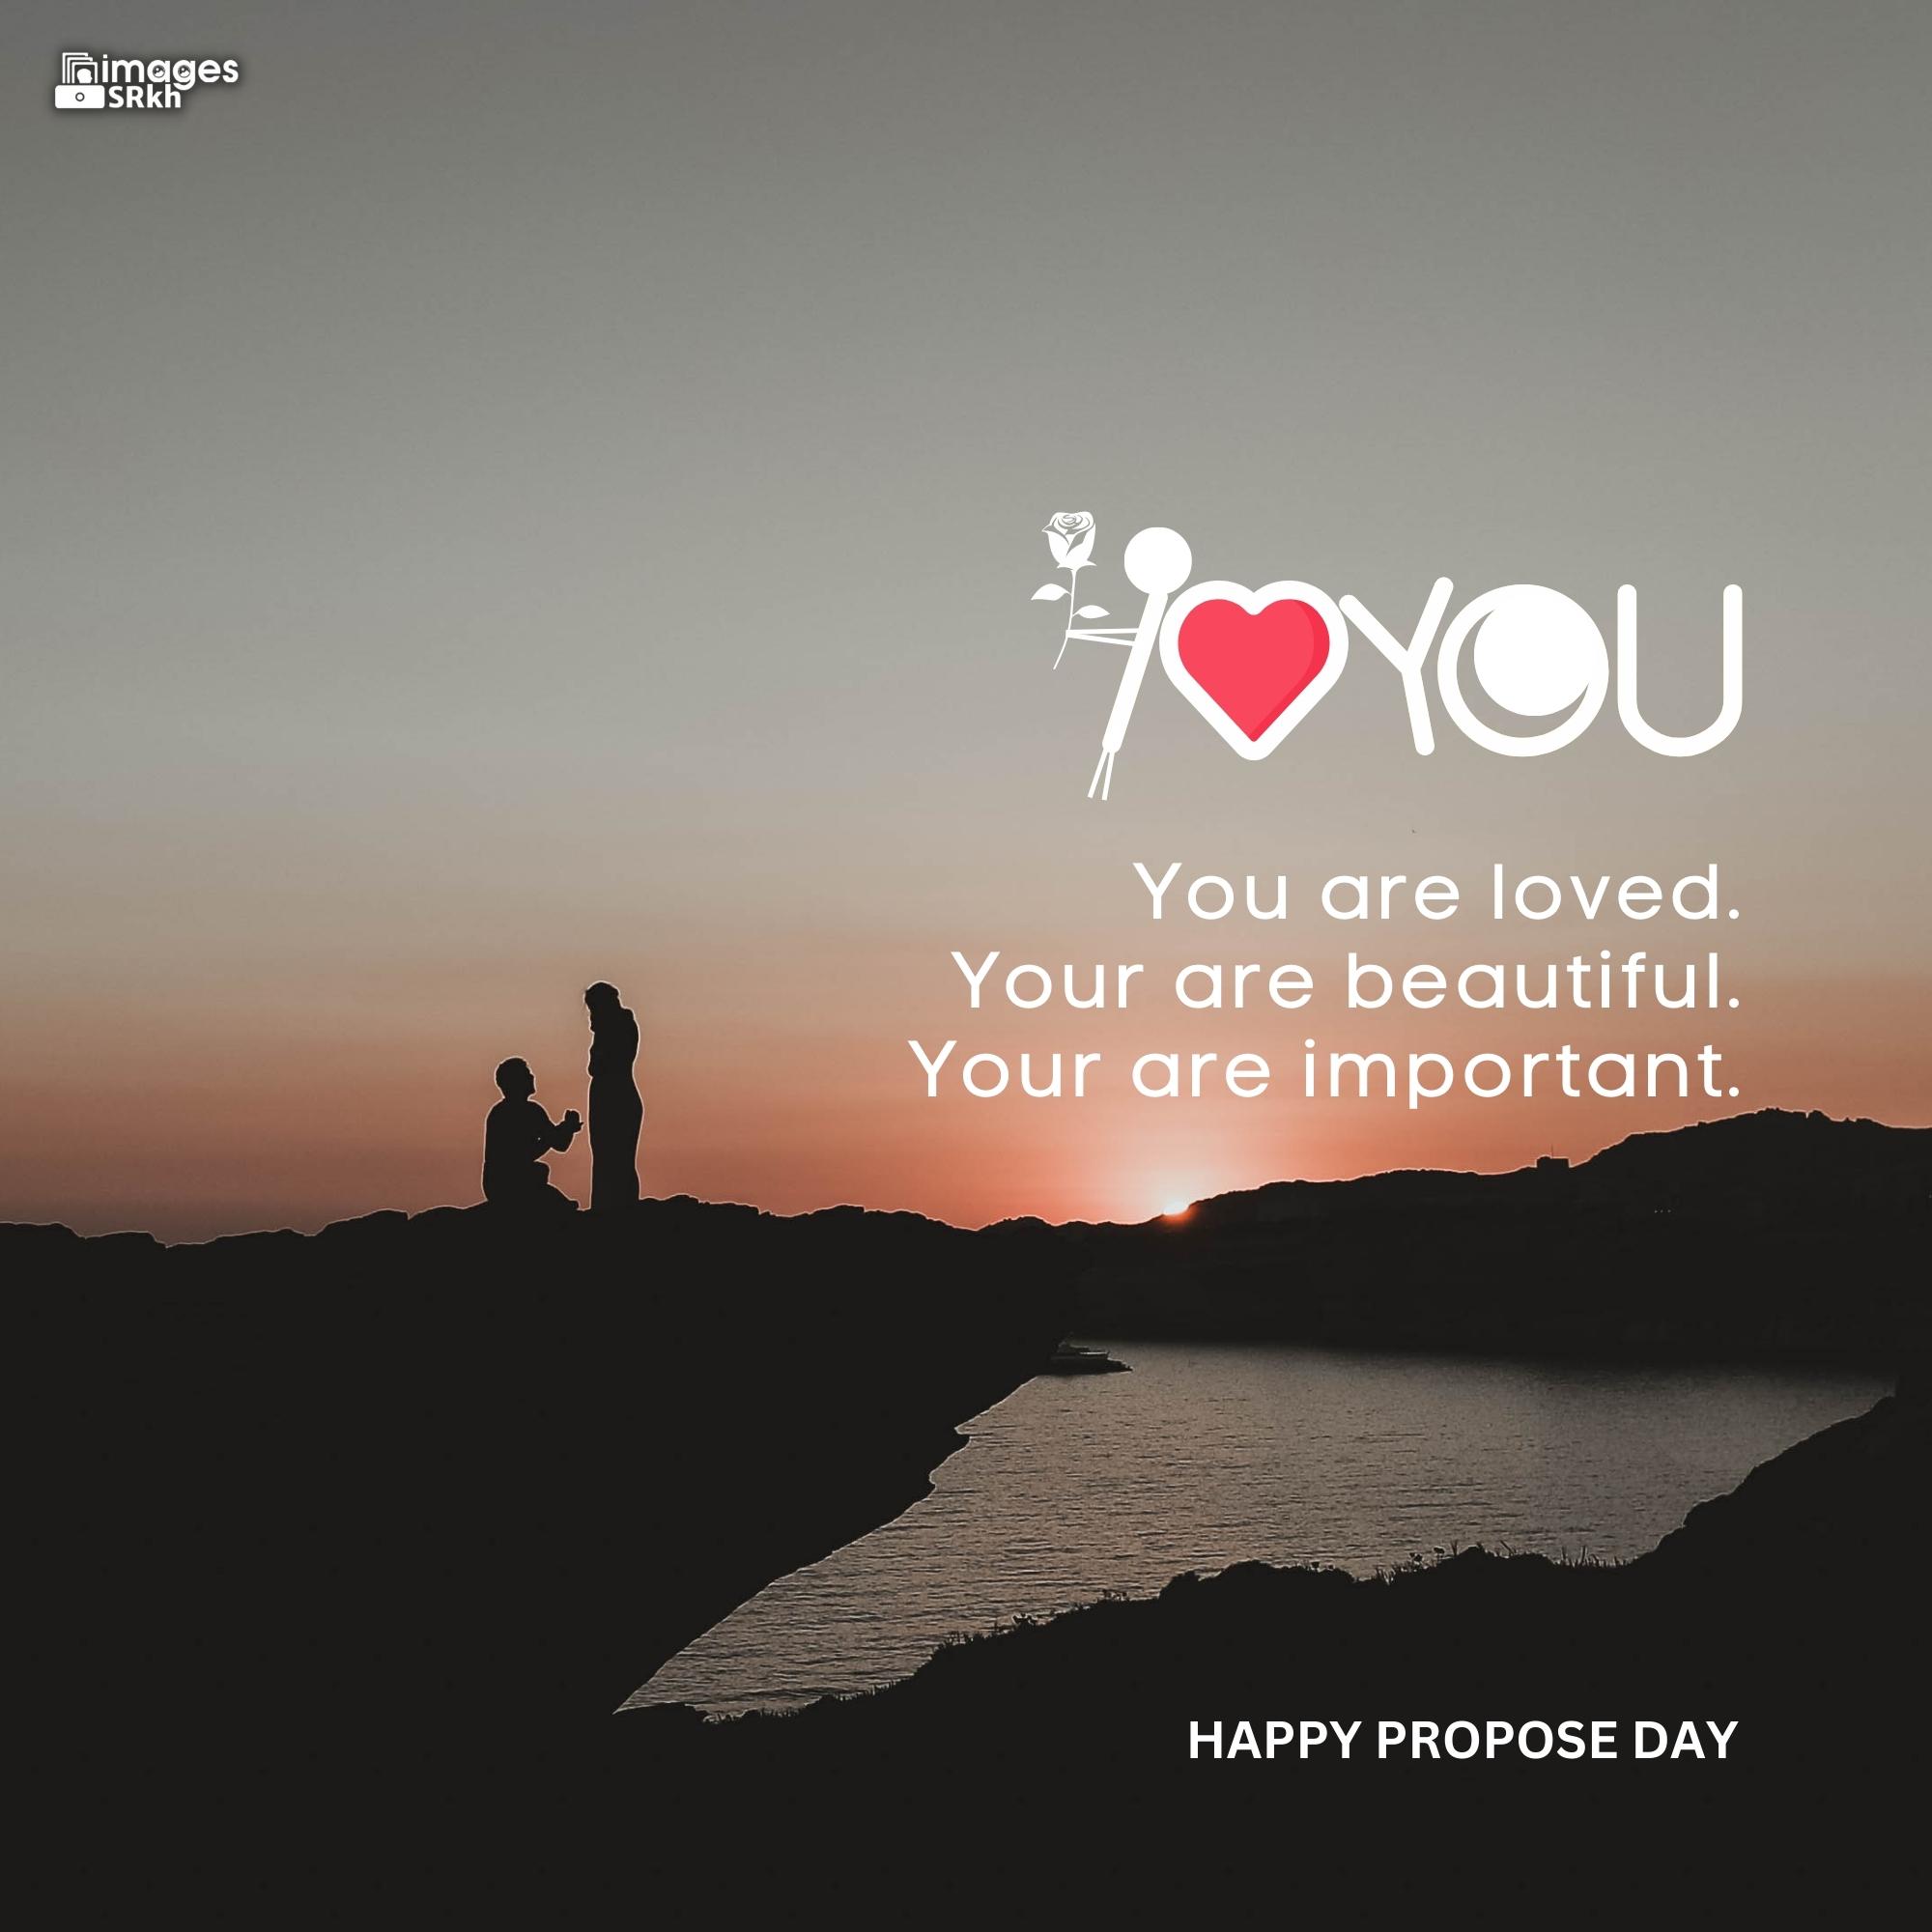 Happy Propose Day Images | 392 | I LOVE YOU